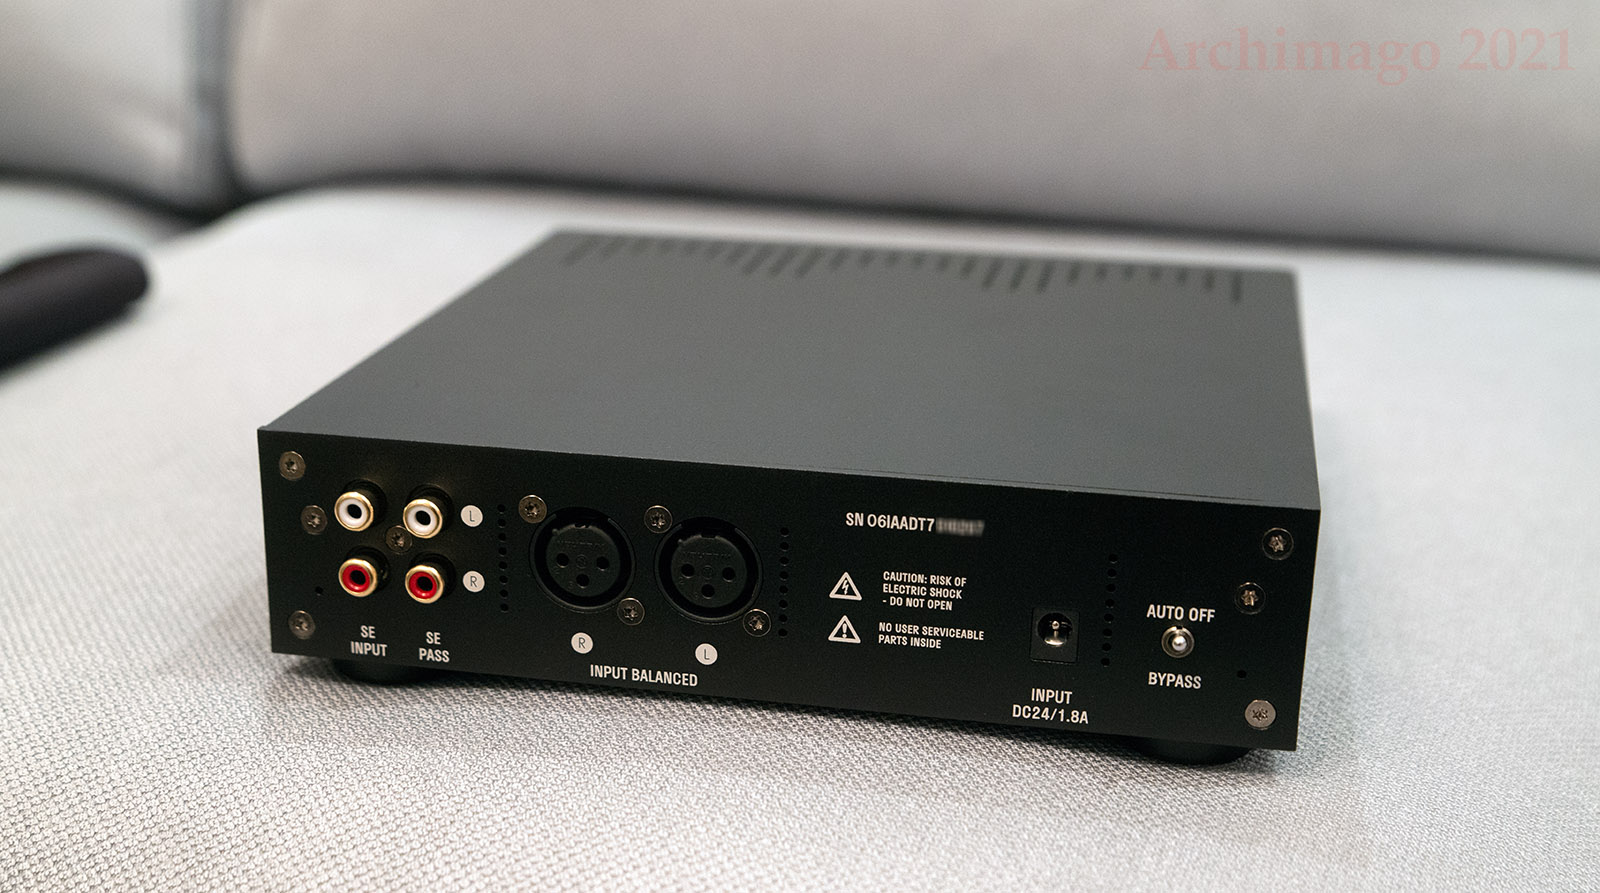 Archimago S Musings Review Measurements Drop Thx a 7 Linear Headphone Amplifier And On Audioholics Thx Onyx Dac Amp Review With A Dash Of Mqa Nonsense